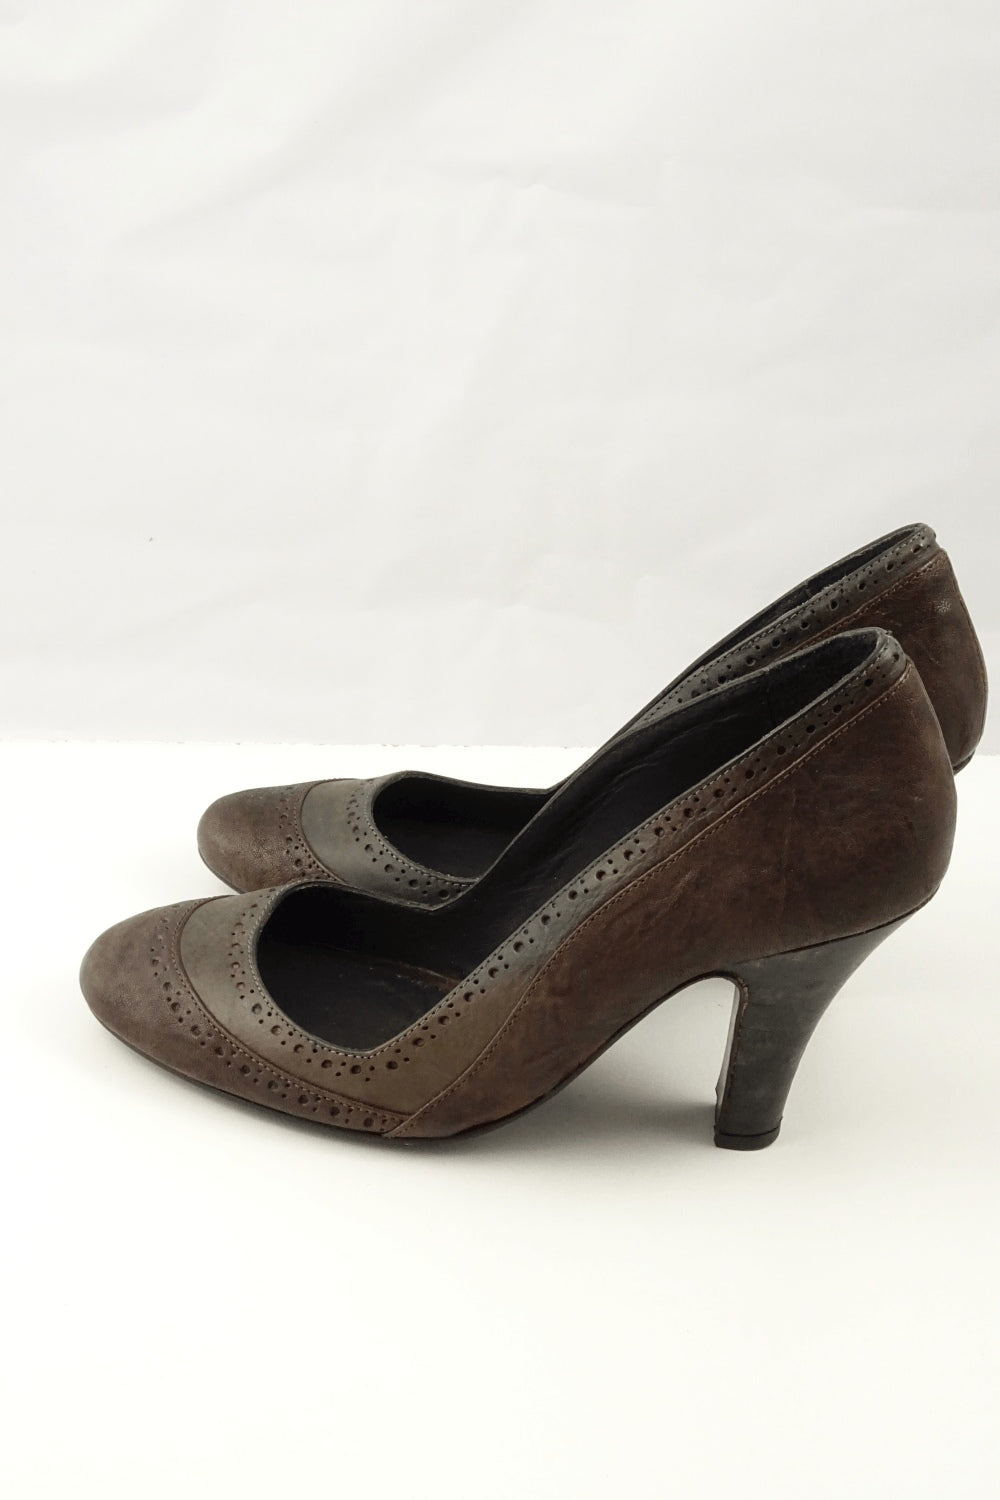 Genuine leather pumps with mixed tone brown and cut out detail around edge.